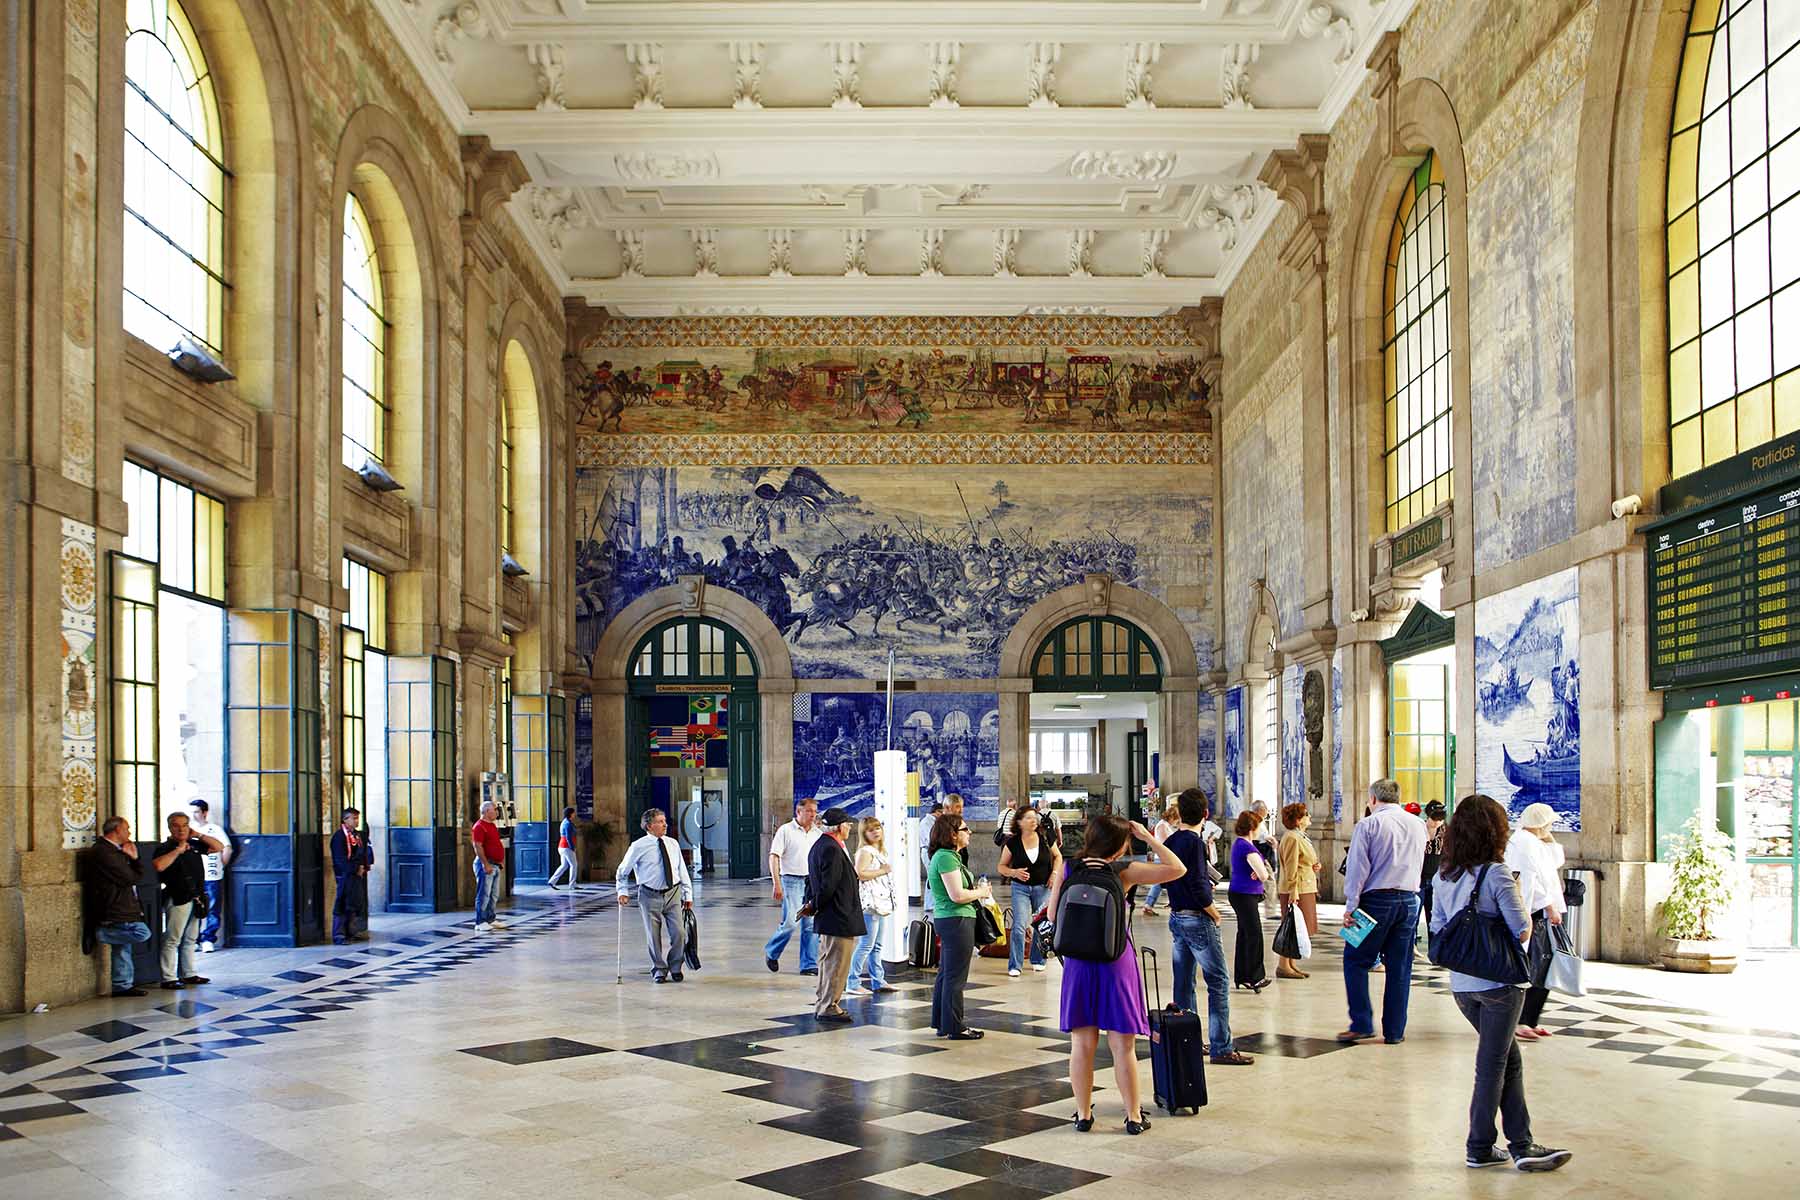 People waiting Sao Bento train station in Central Porto, Portugal. The historical station features the iconic blue tile panels that depict scenes of the history of Portugal.